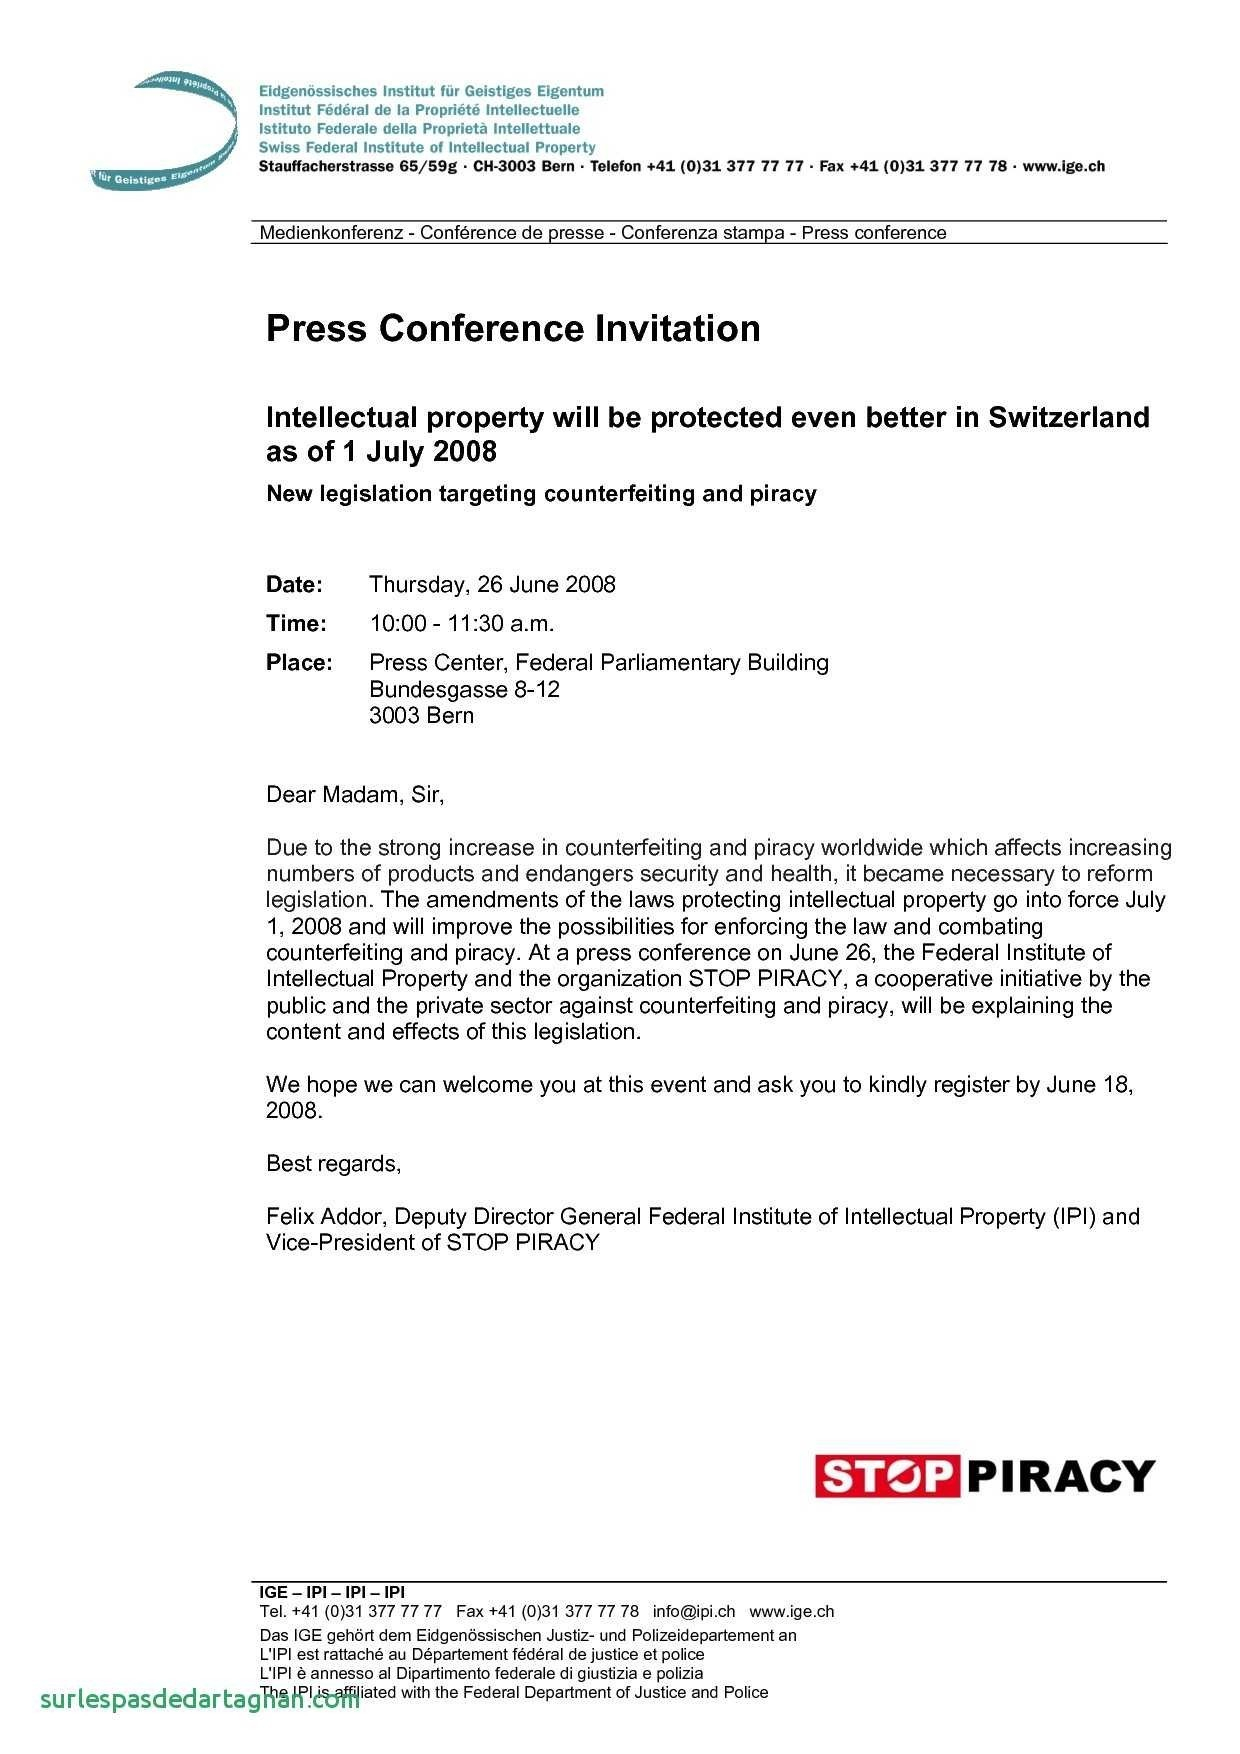 Invitation Letter Template To Conference Save Sample Invitation for dimensions 1240 X 1754